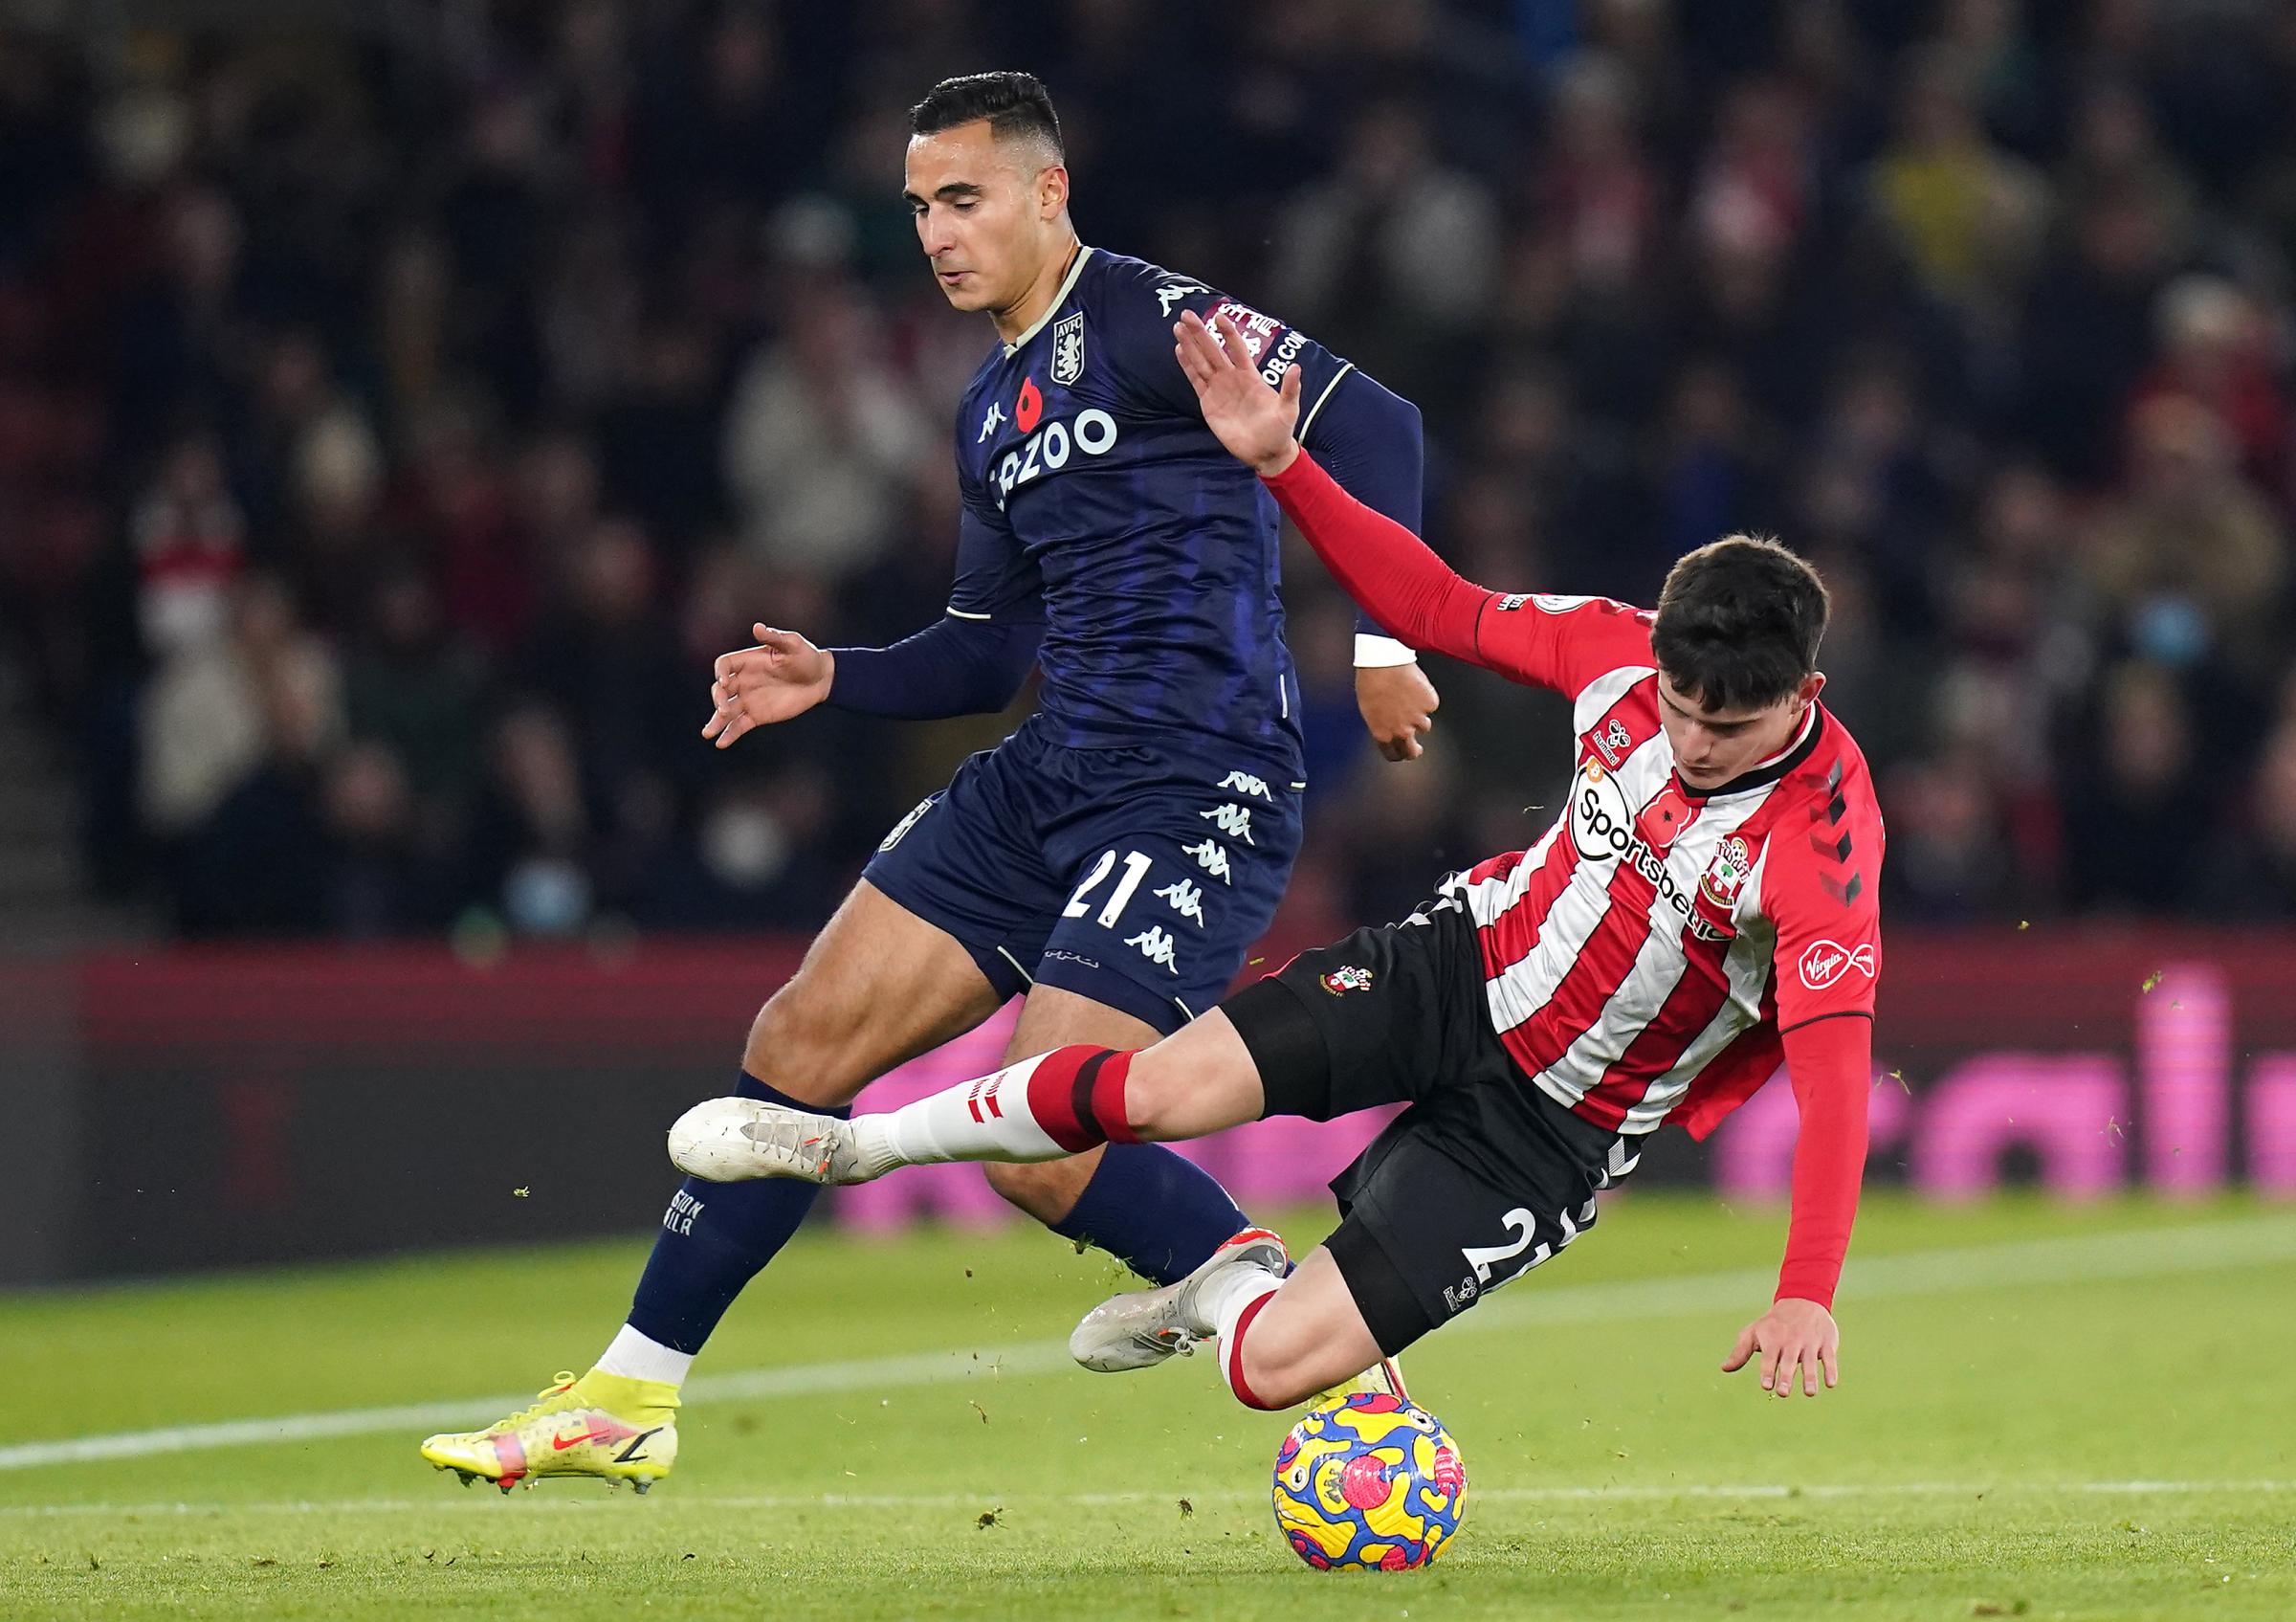 Pundit says El Ghazi should have been sent off at St Mary's